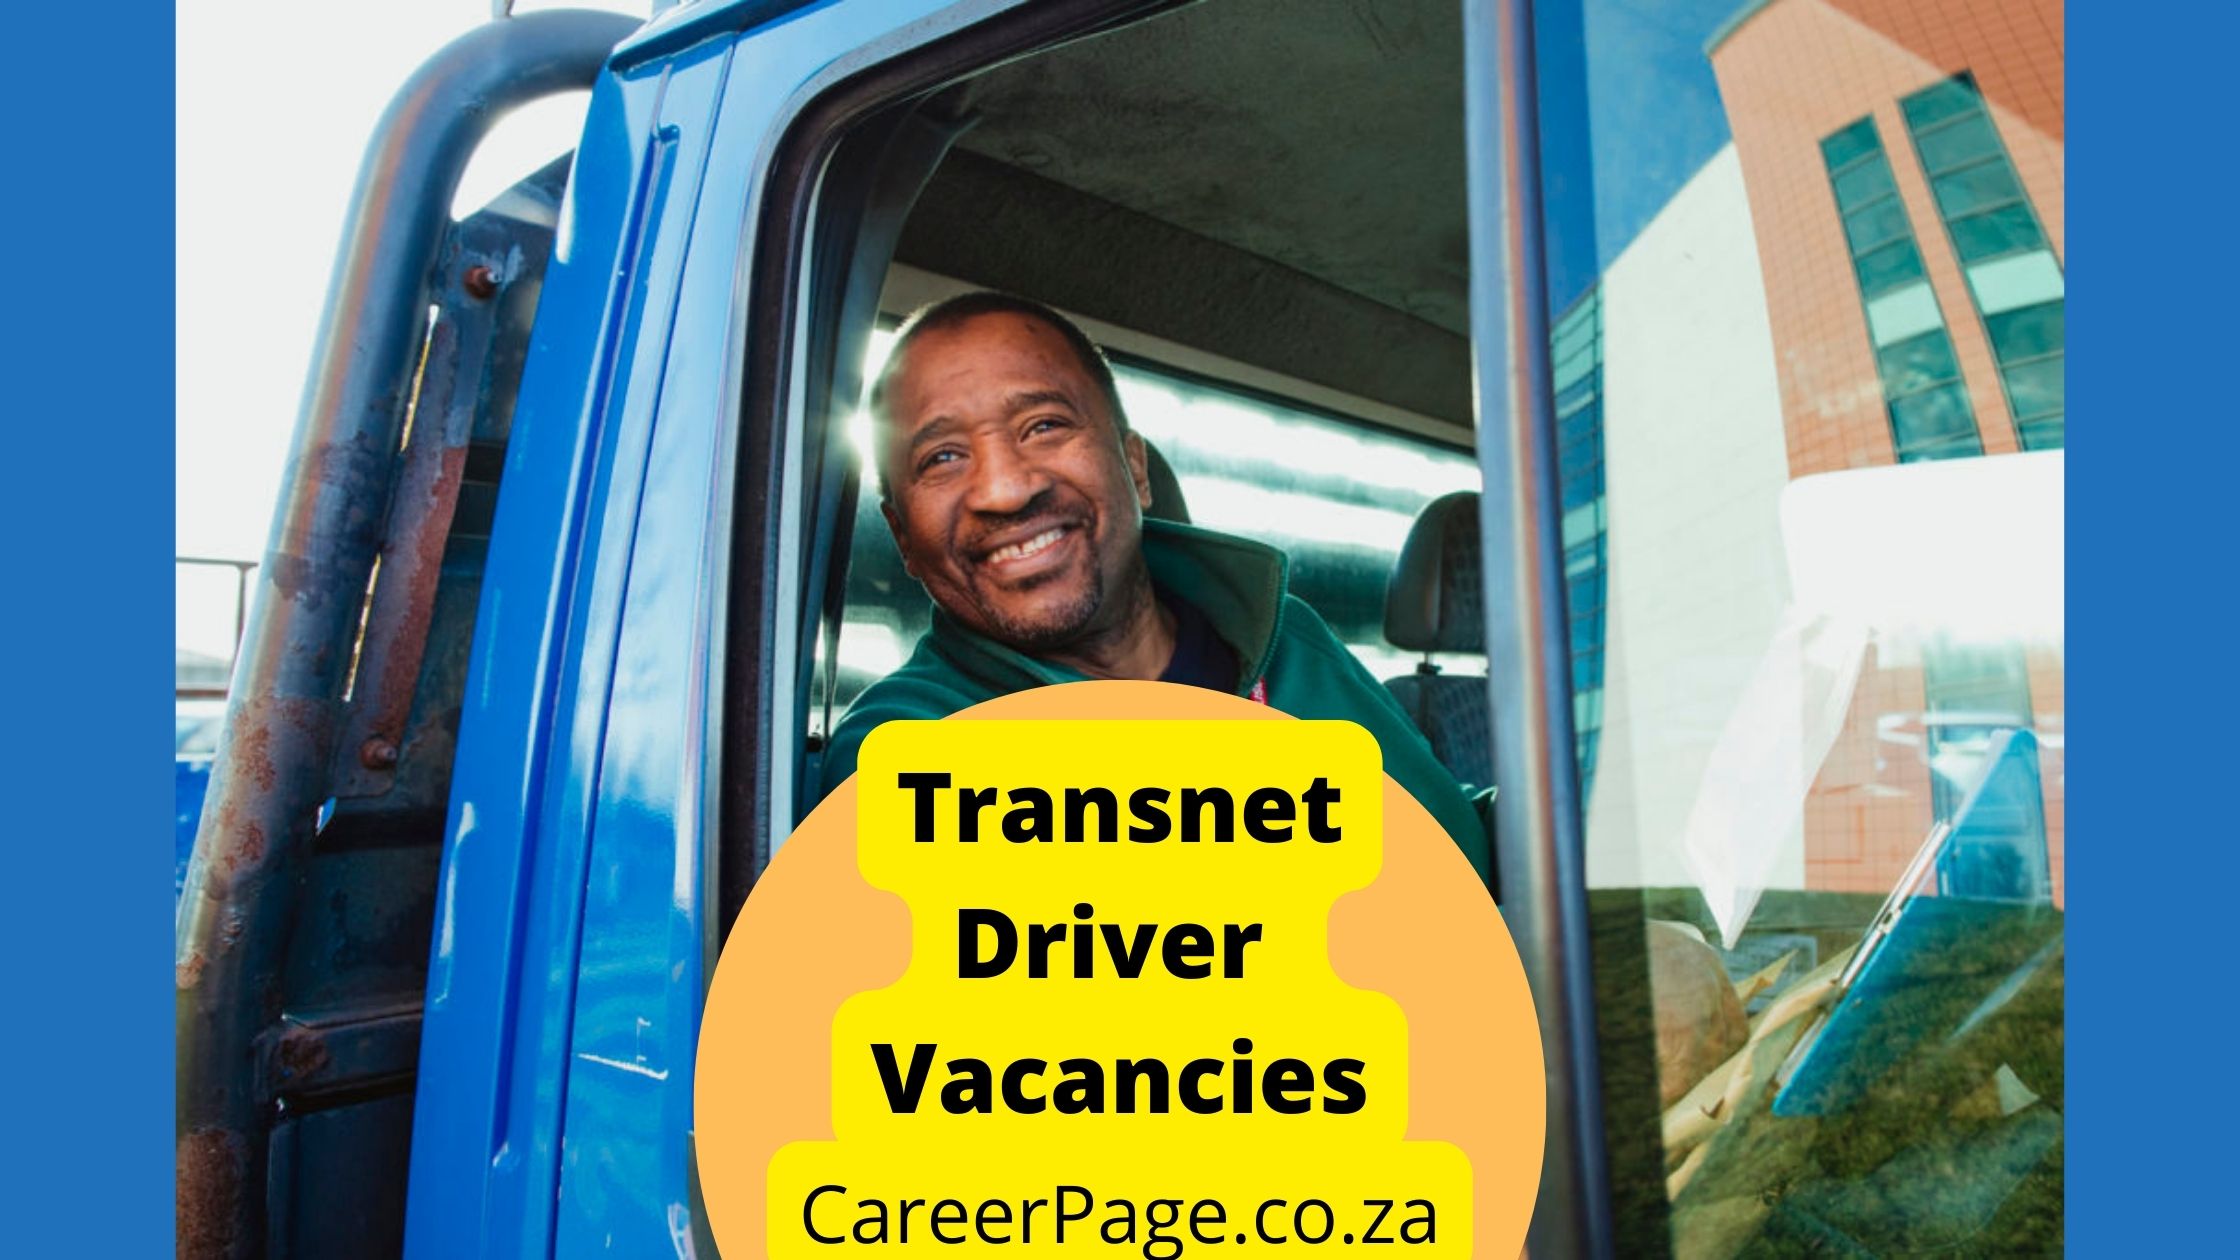 Dive into a Driver’s Boots for Transnet Driver Vacancy